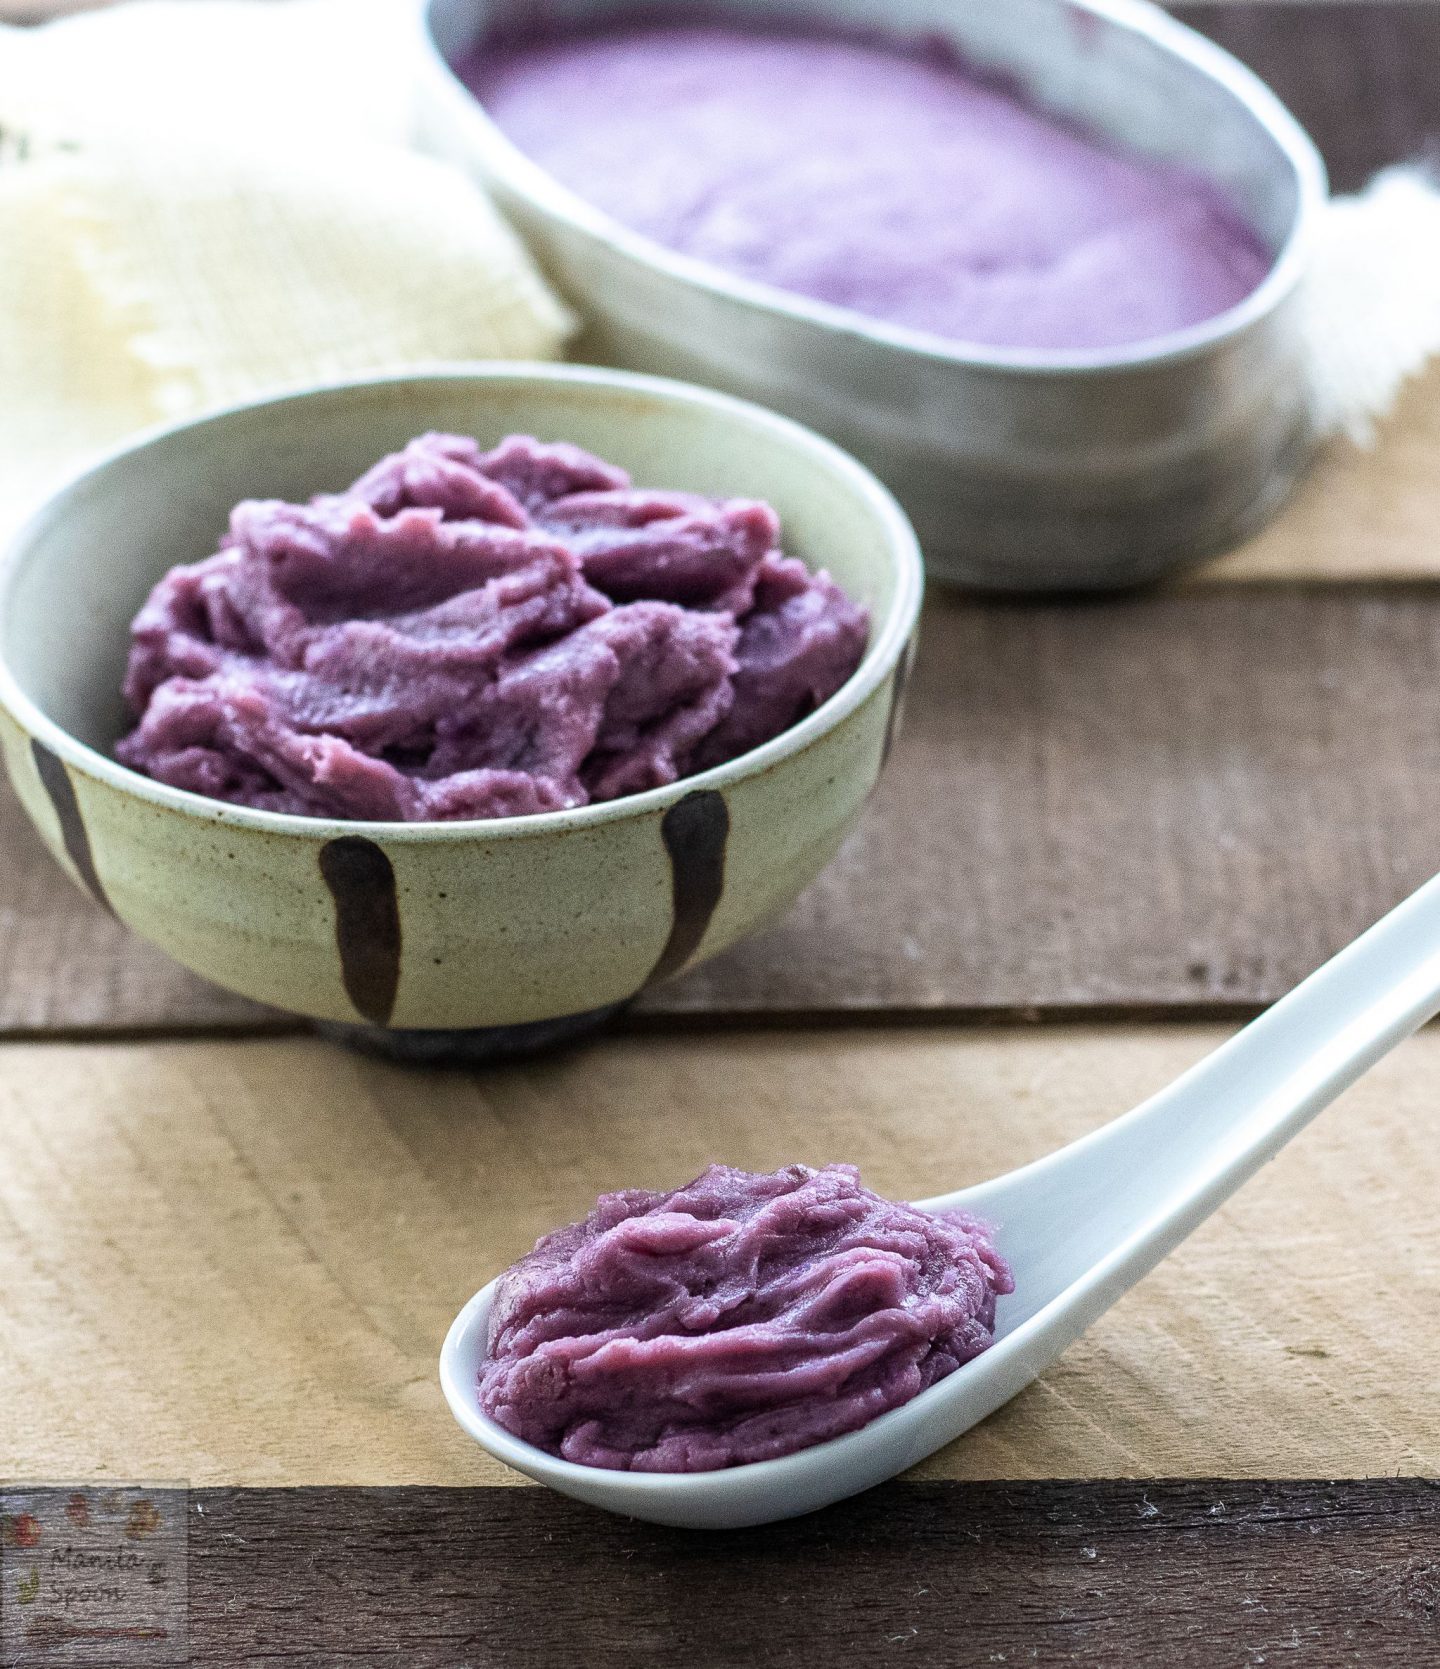 This Filipino purple yam dessert (ube halaya or ube jam) is not only eye-catching, it's totally delicious!! Mashed purple yam is cooked slowly with butter, evaporated milk and condensed milk which give this colorful dessert such a luscious buttery, creamy and sweet flavor. Great on its own or as topping for halo-halo or as jam for bread or filling for pastries.